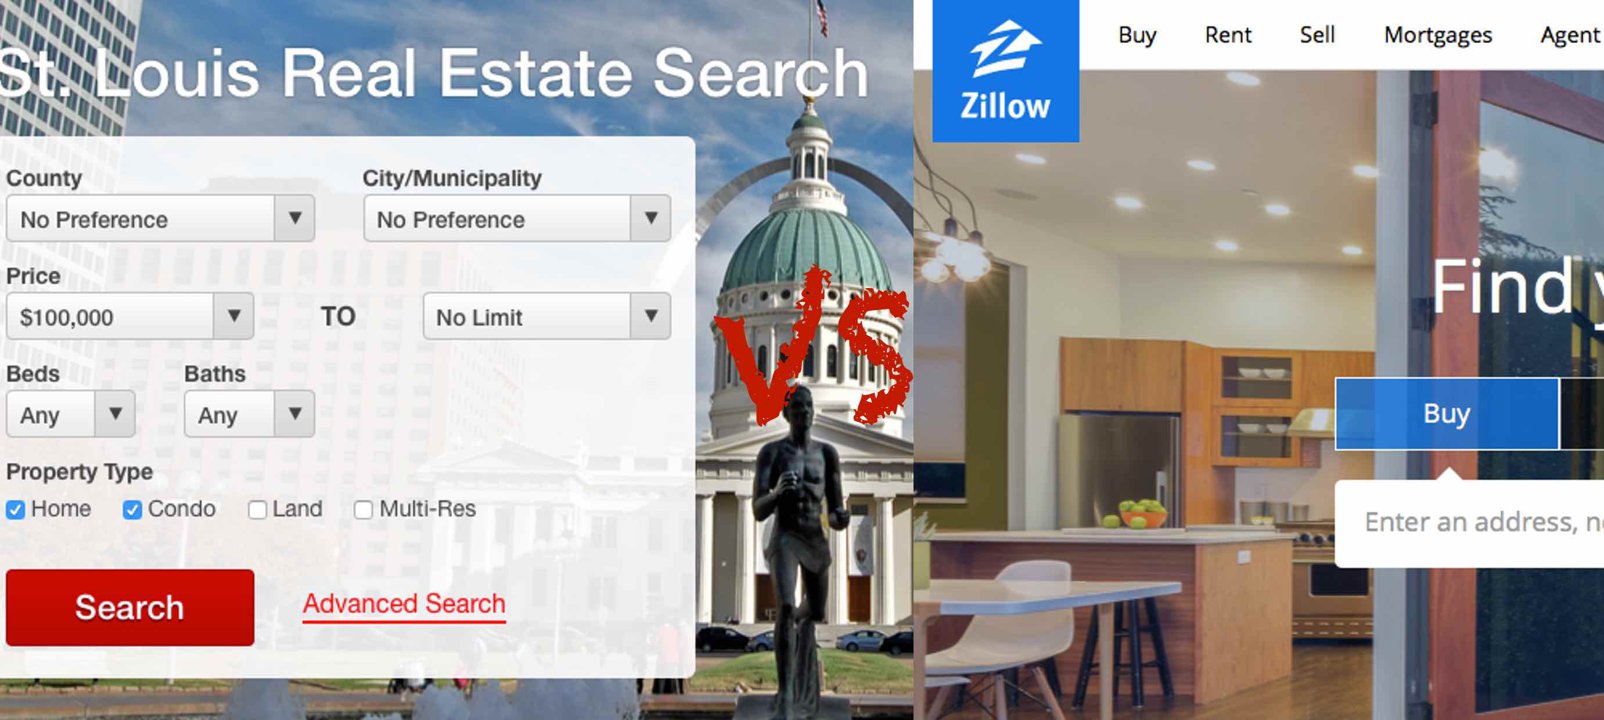 Why St Louis Real Estate Search is Better than zillow